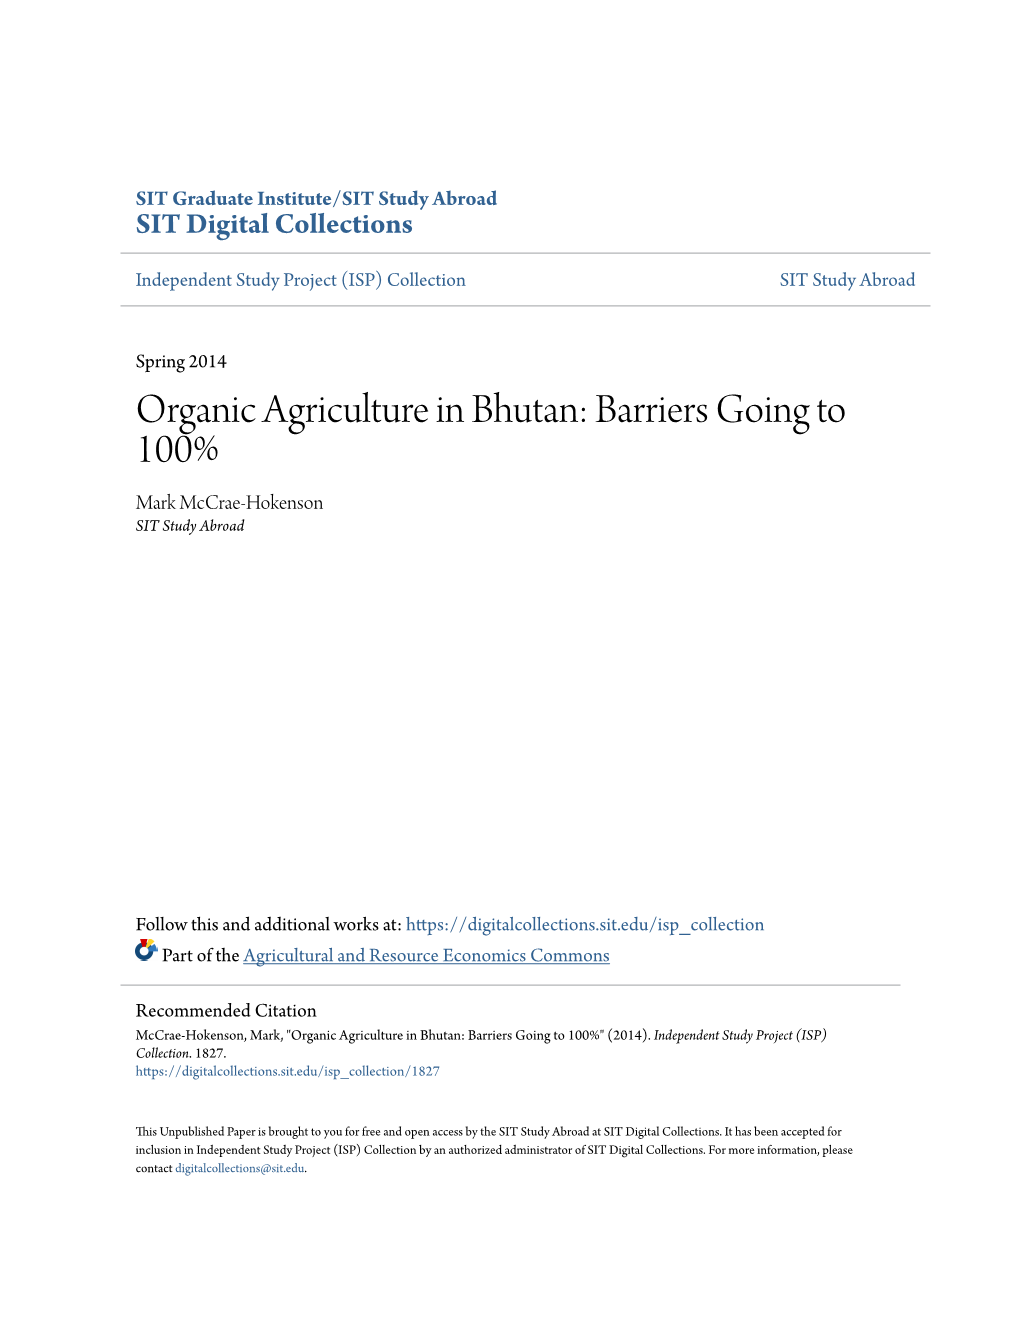 Organic Agriculture in Bhutan: Barriers Going to 100% Mark Mccrae-Hokenson SIT Study Abroad